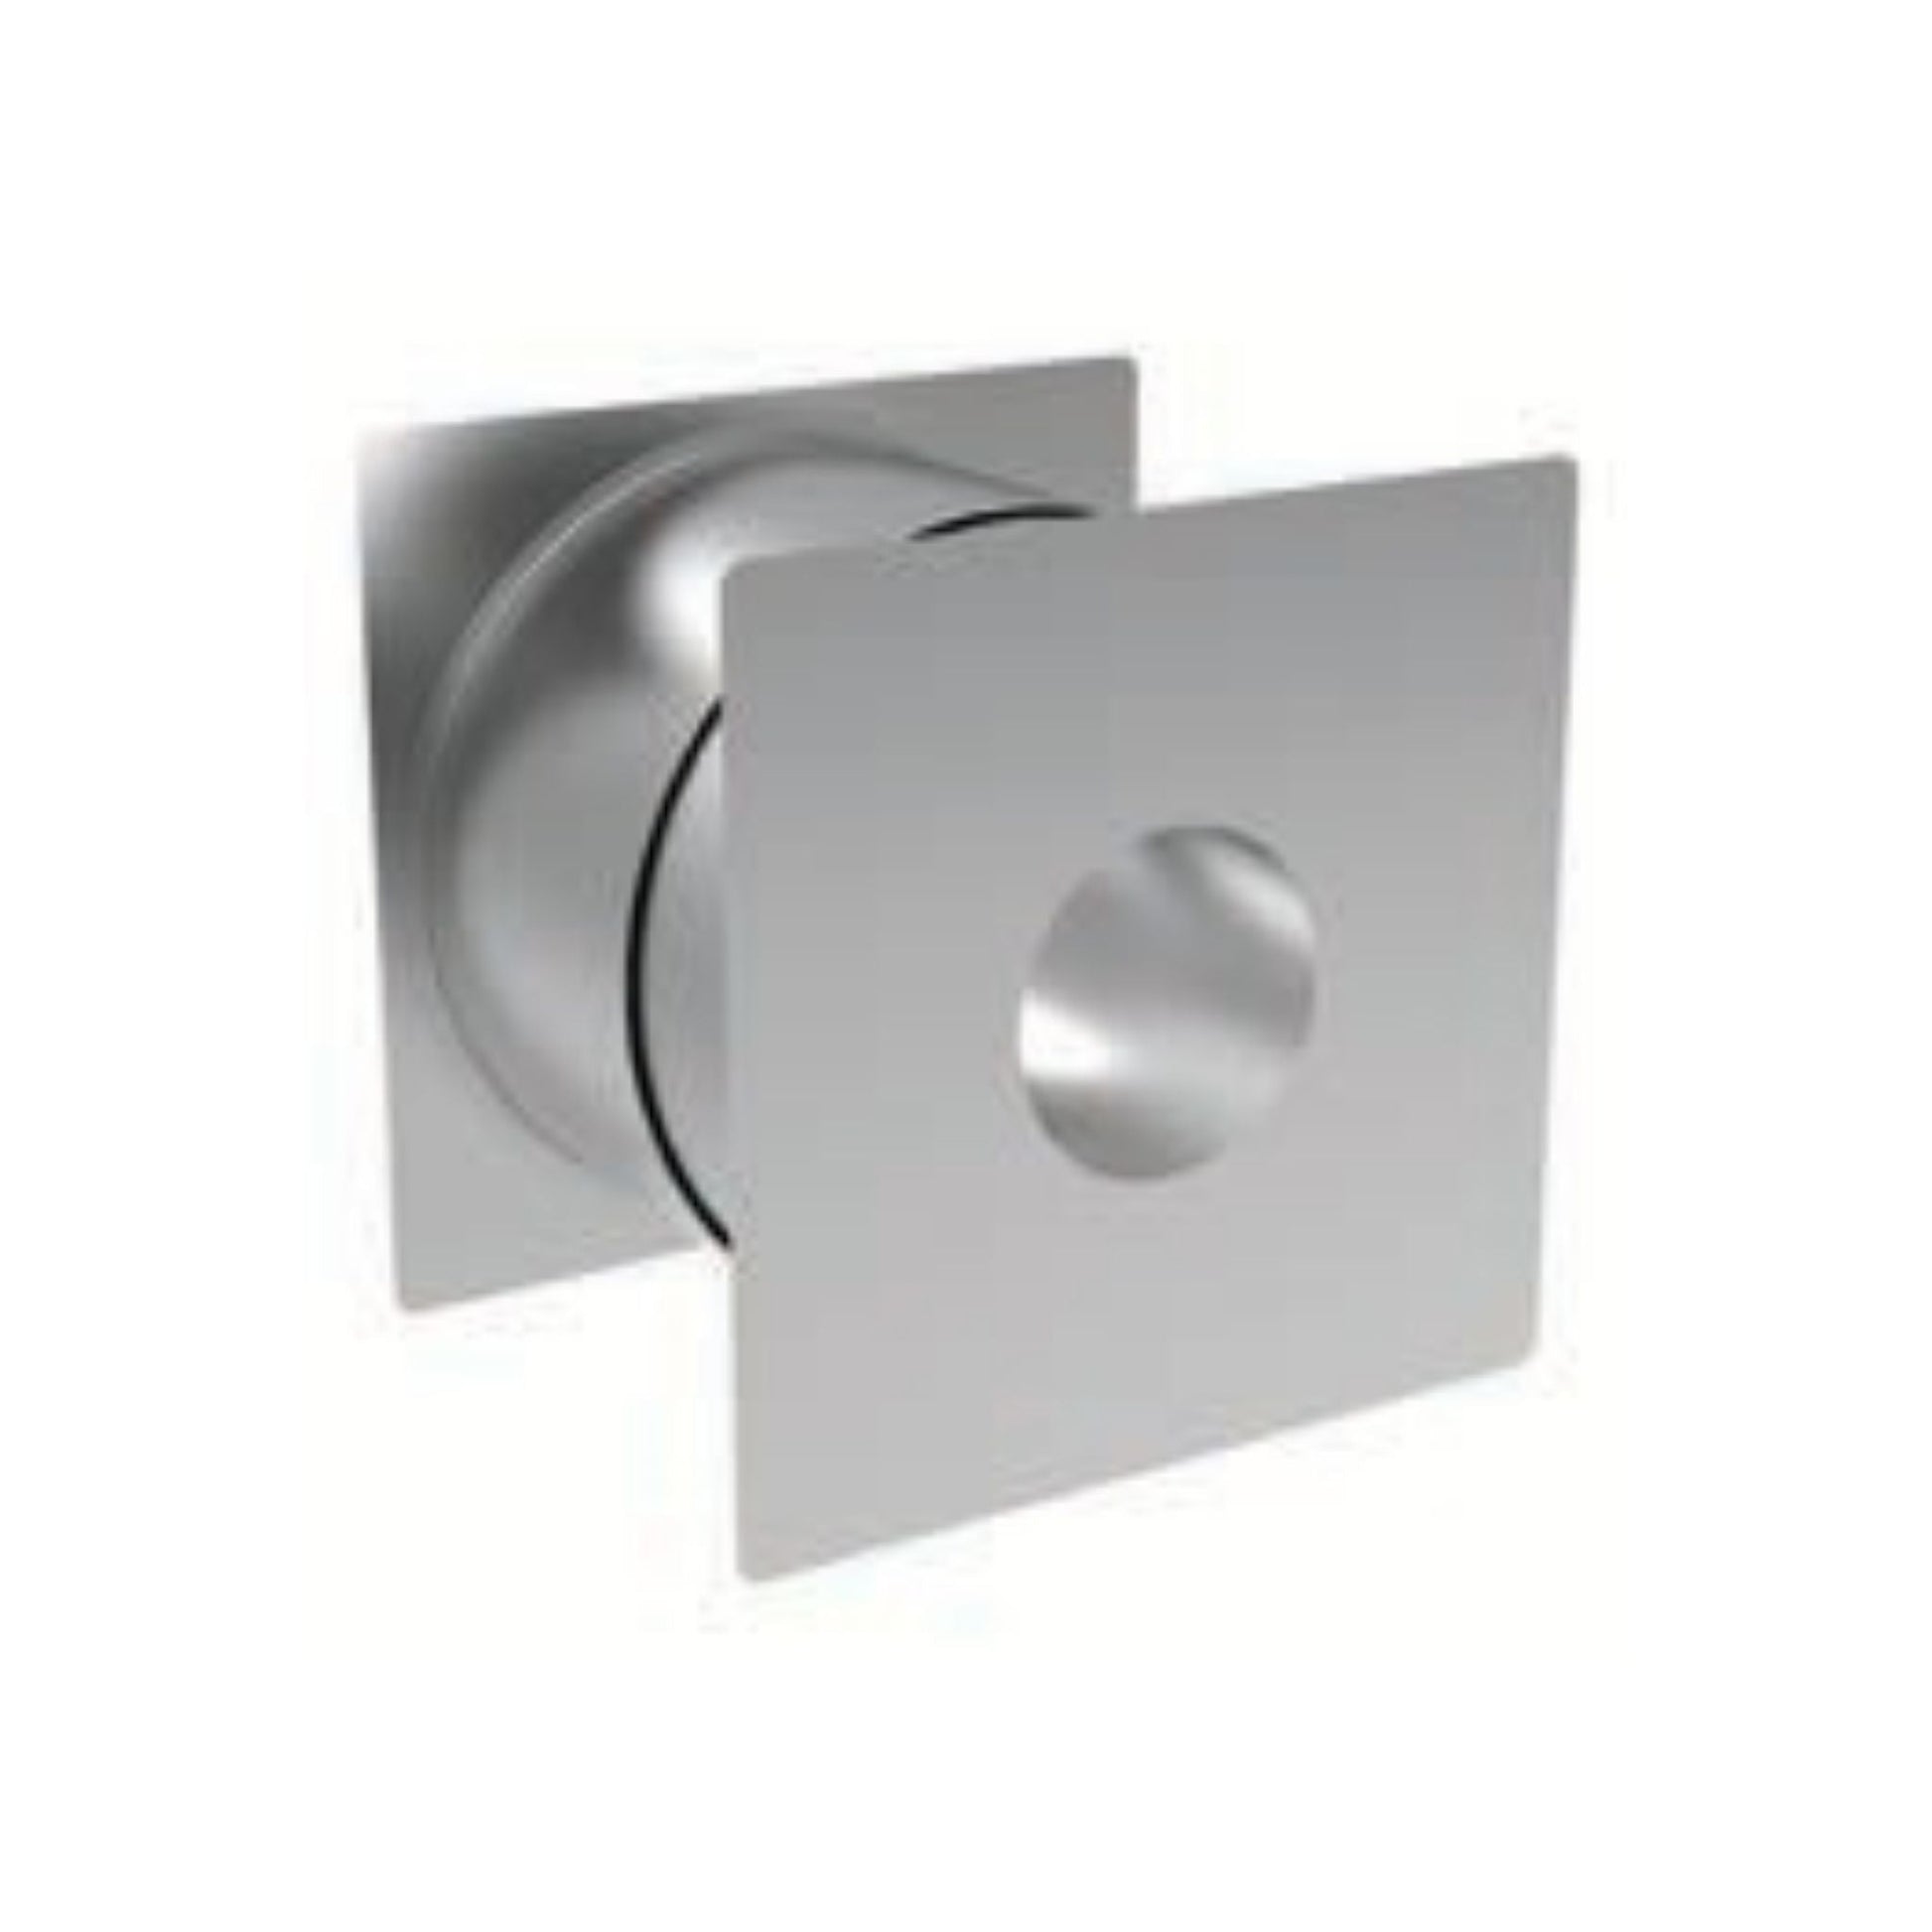 DuraVent FasNSeal 4" 29-4C Stainless Steel Insulated Wall Pass Through